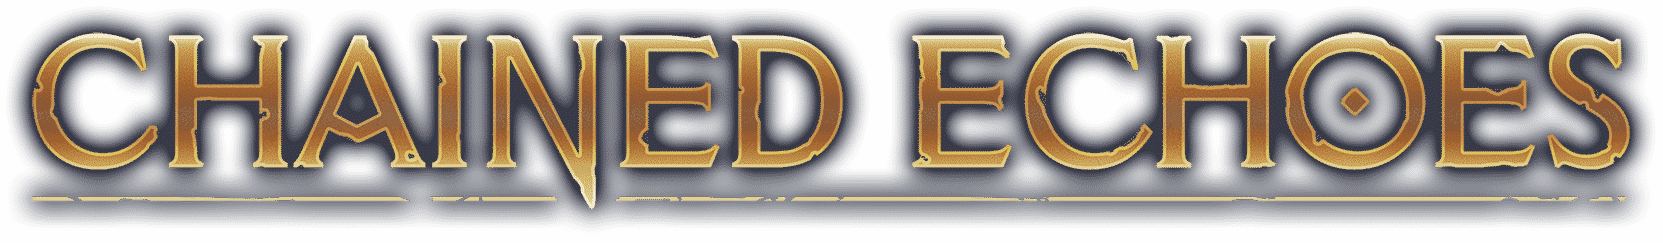 Chained Echoes Logo